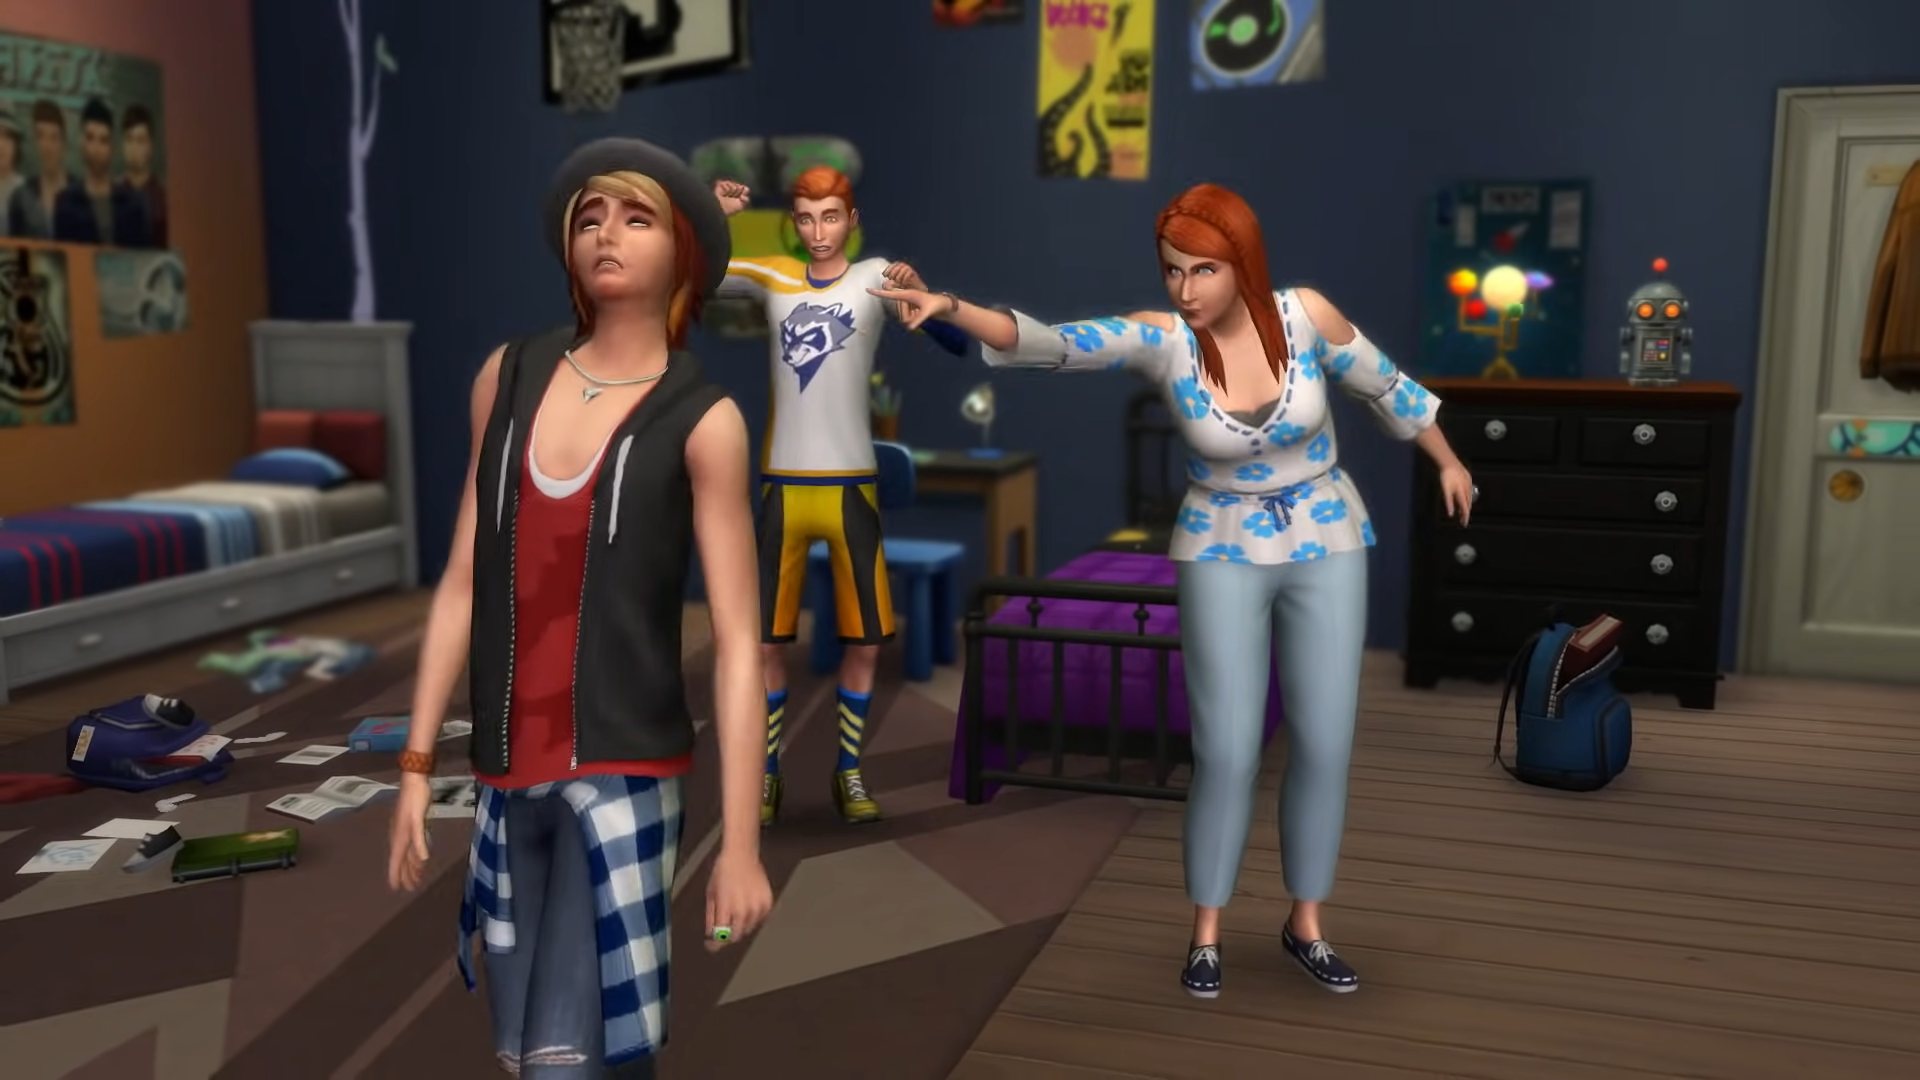 The sims 4 all expansions and stuff packs free download